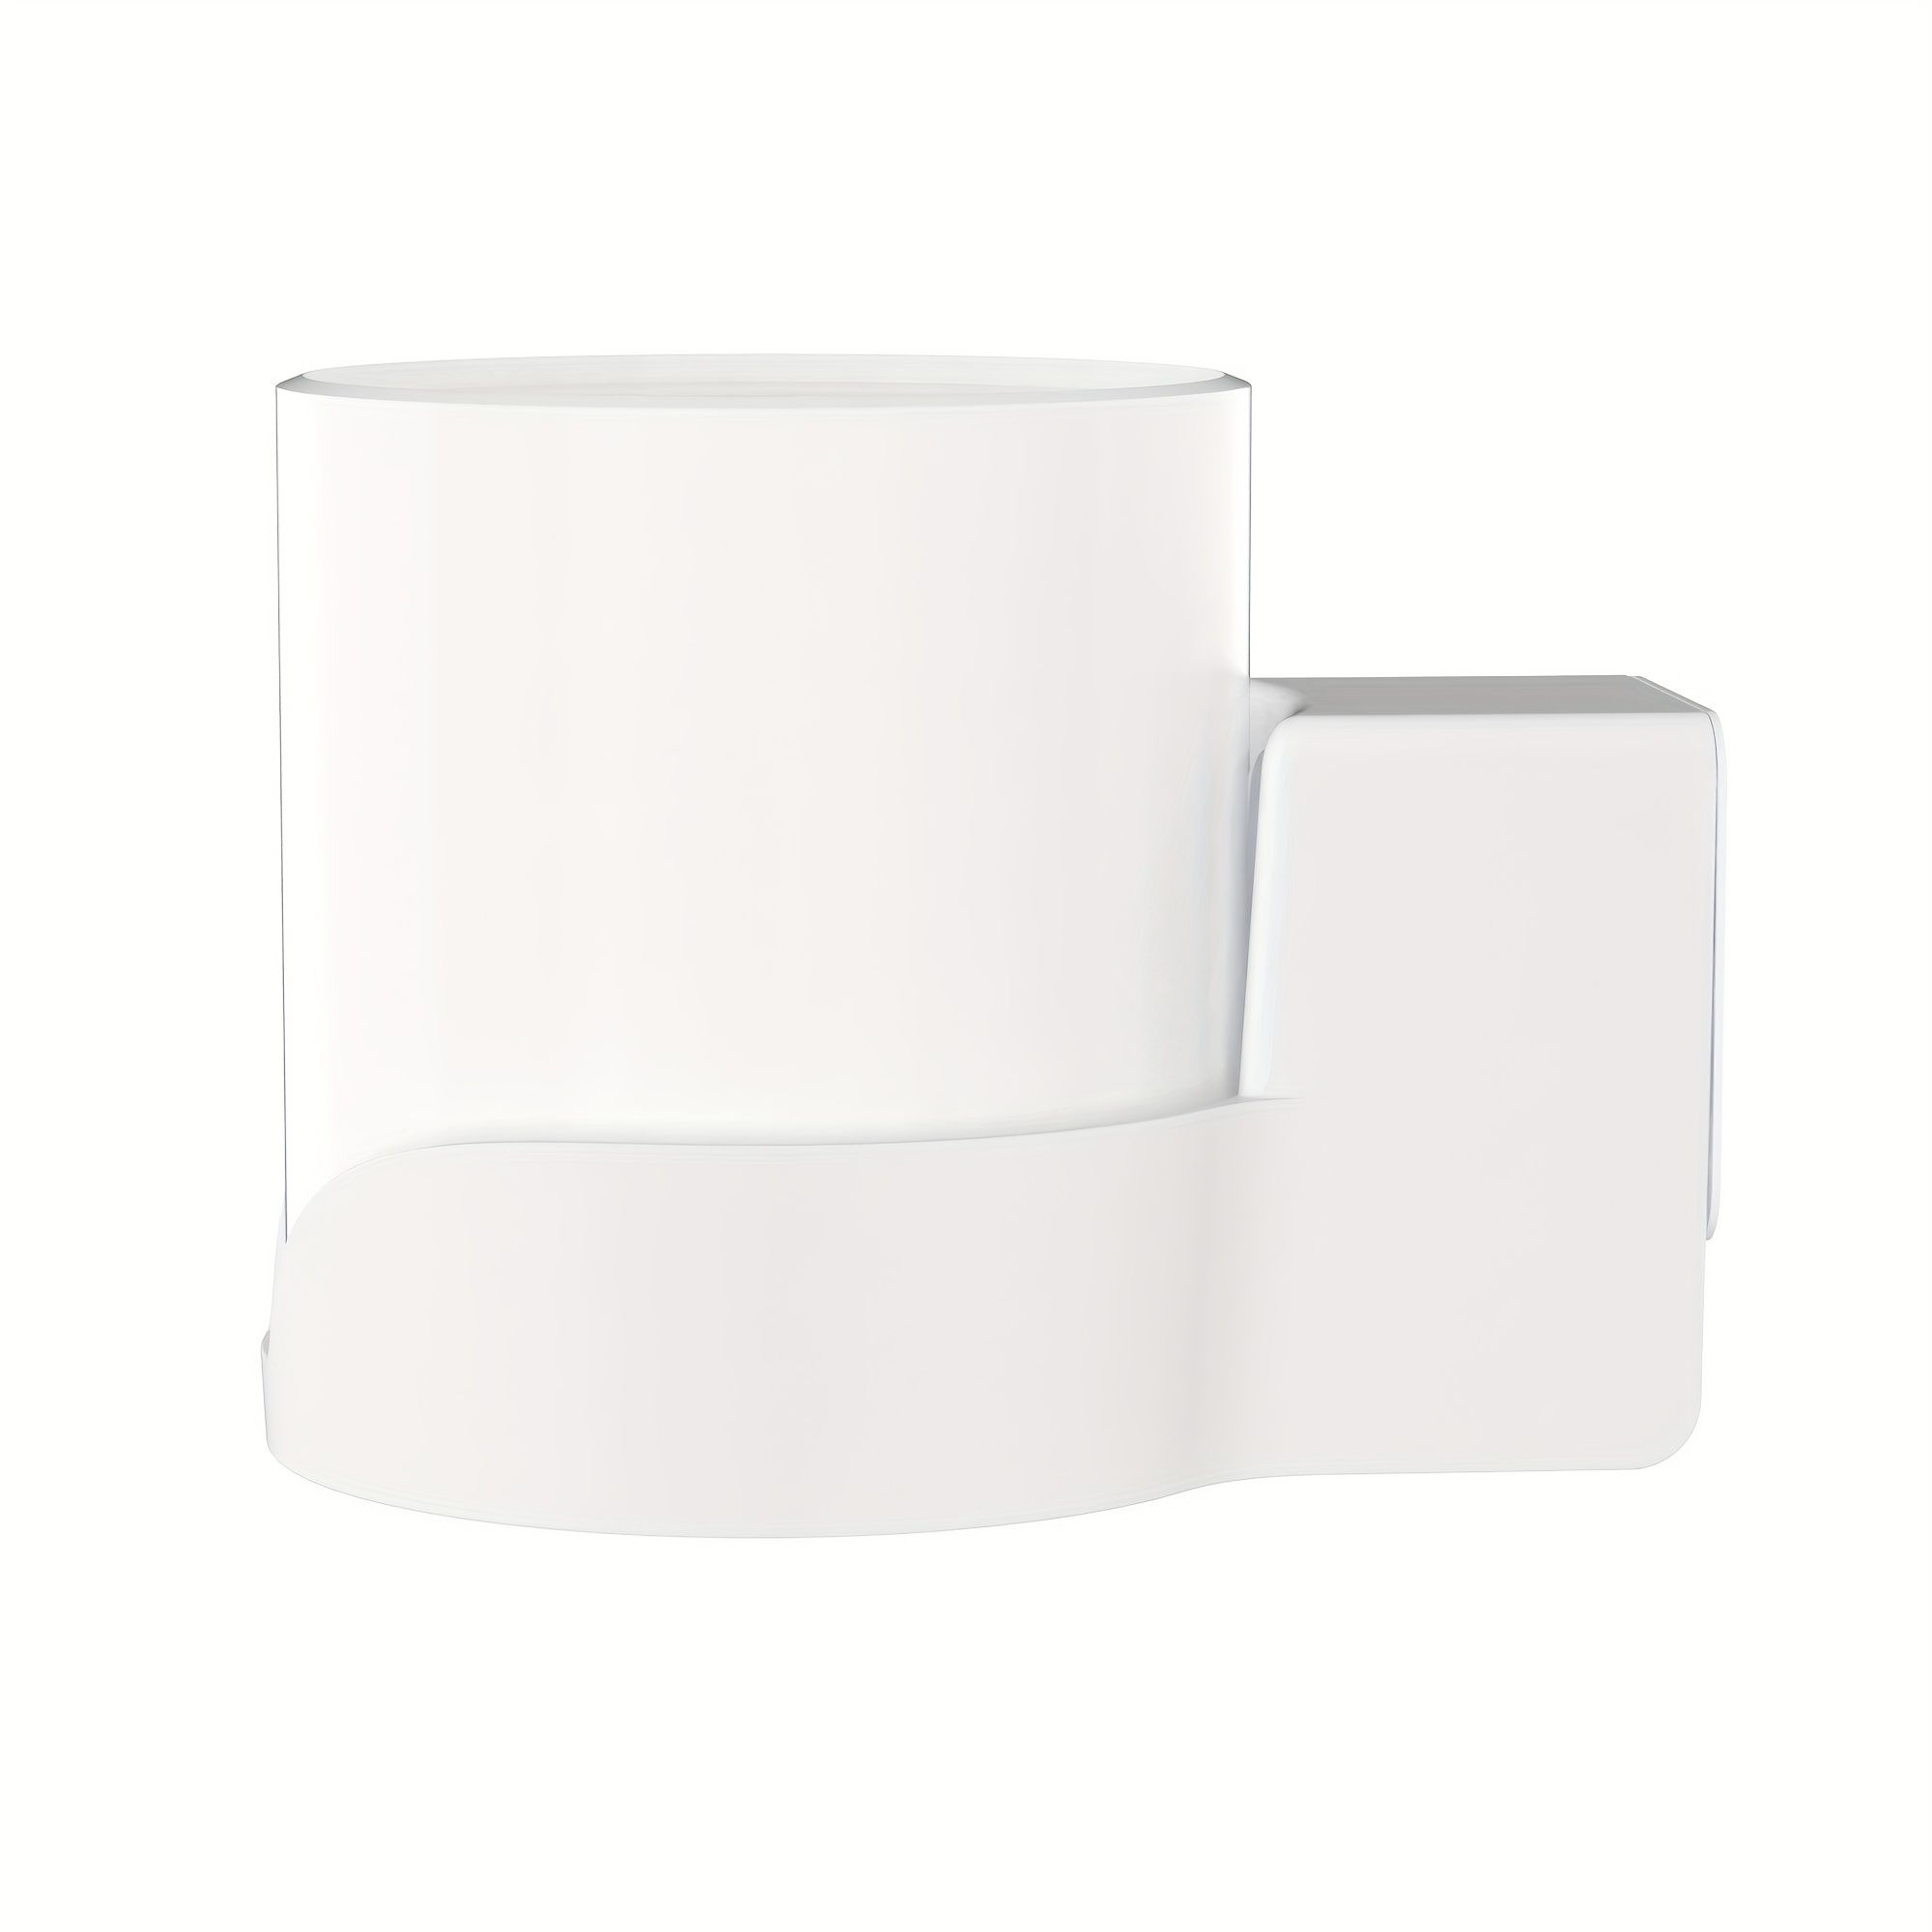 SLEEMAKE Wi-Fi Wall Mount for TP-Link Deco X50-PoE Whole Home Mesh